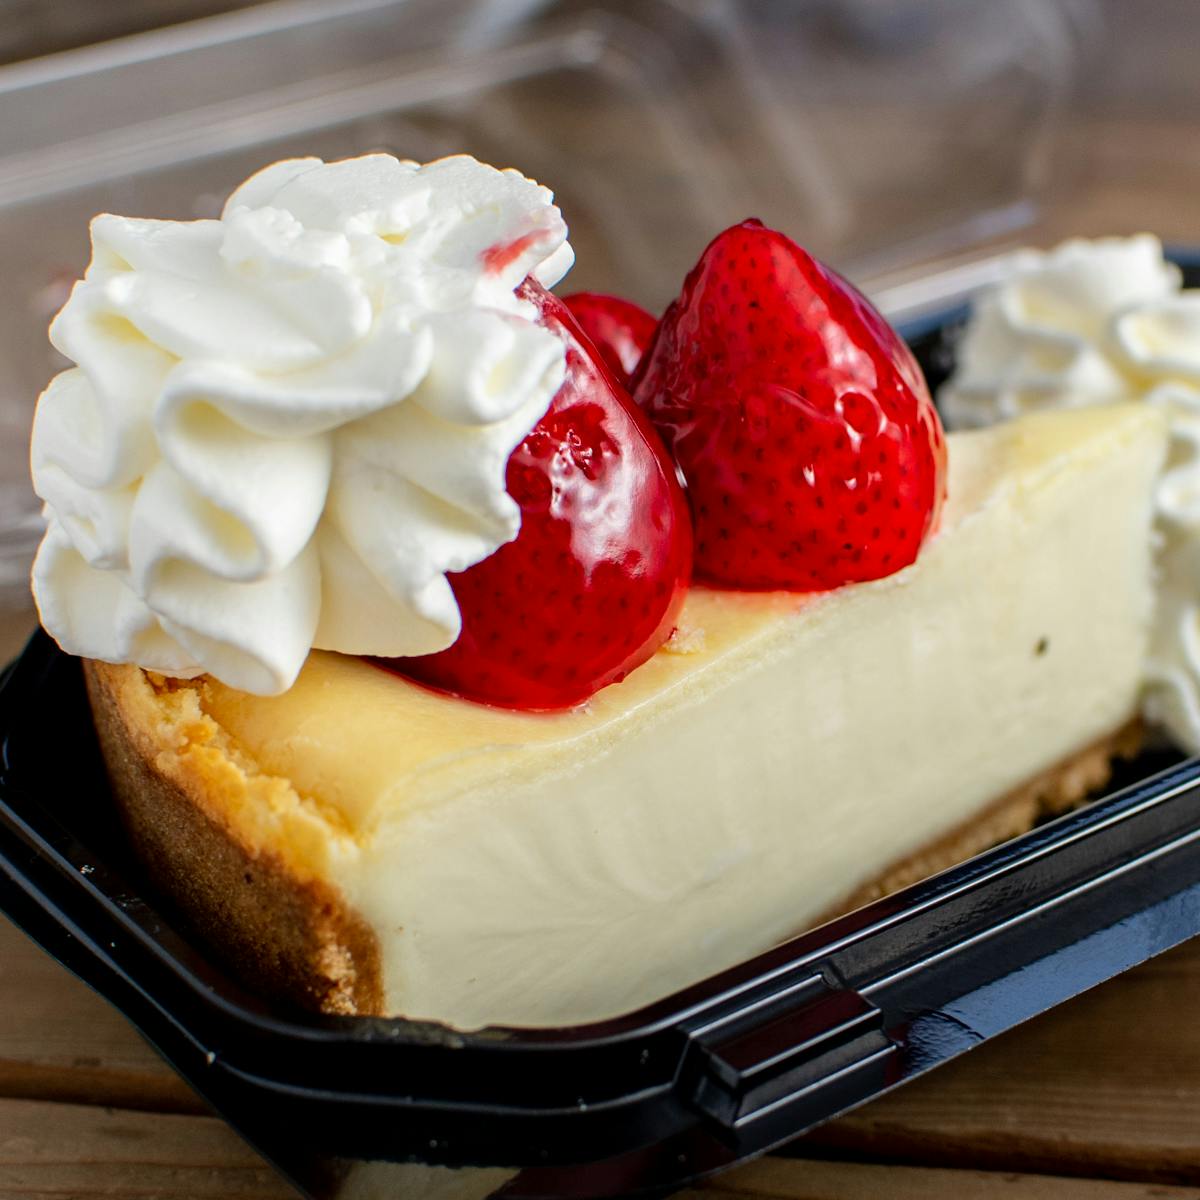 Fresh Strawberry Cheesecake from The Cheesecake Factory - Milwaukee Bayshore Dr in Glendale, WI